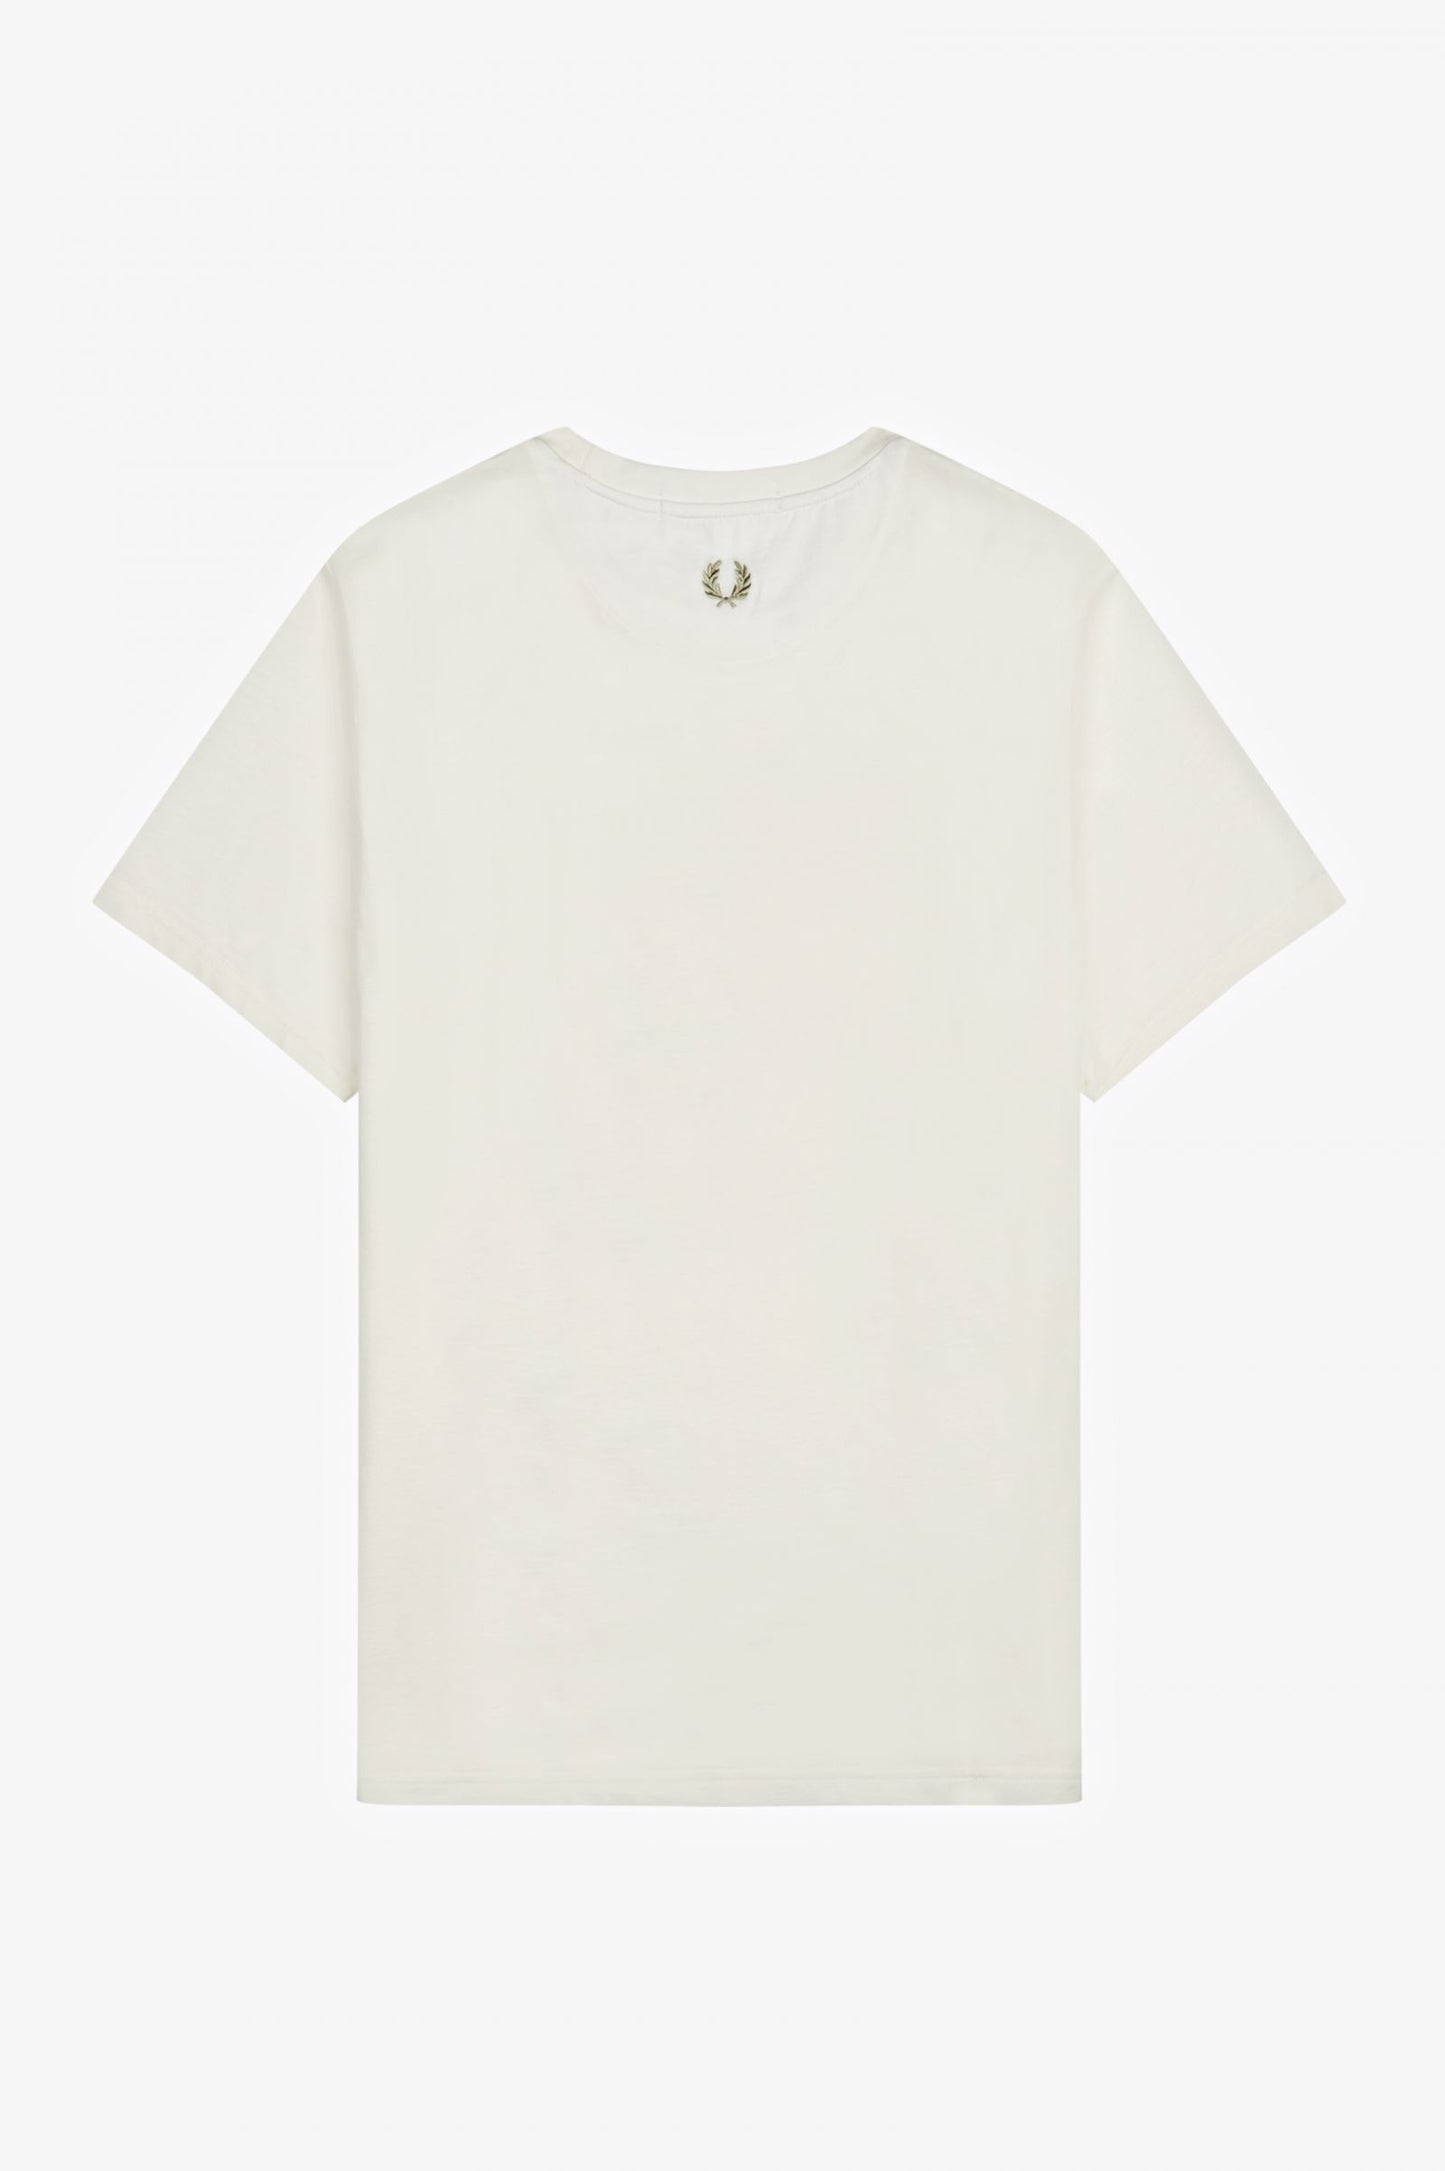 Fred Perry T-shirts  Laurel wreath graphic t-shirt q2 - snow white 